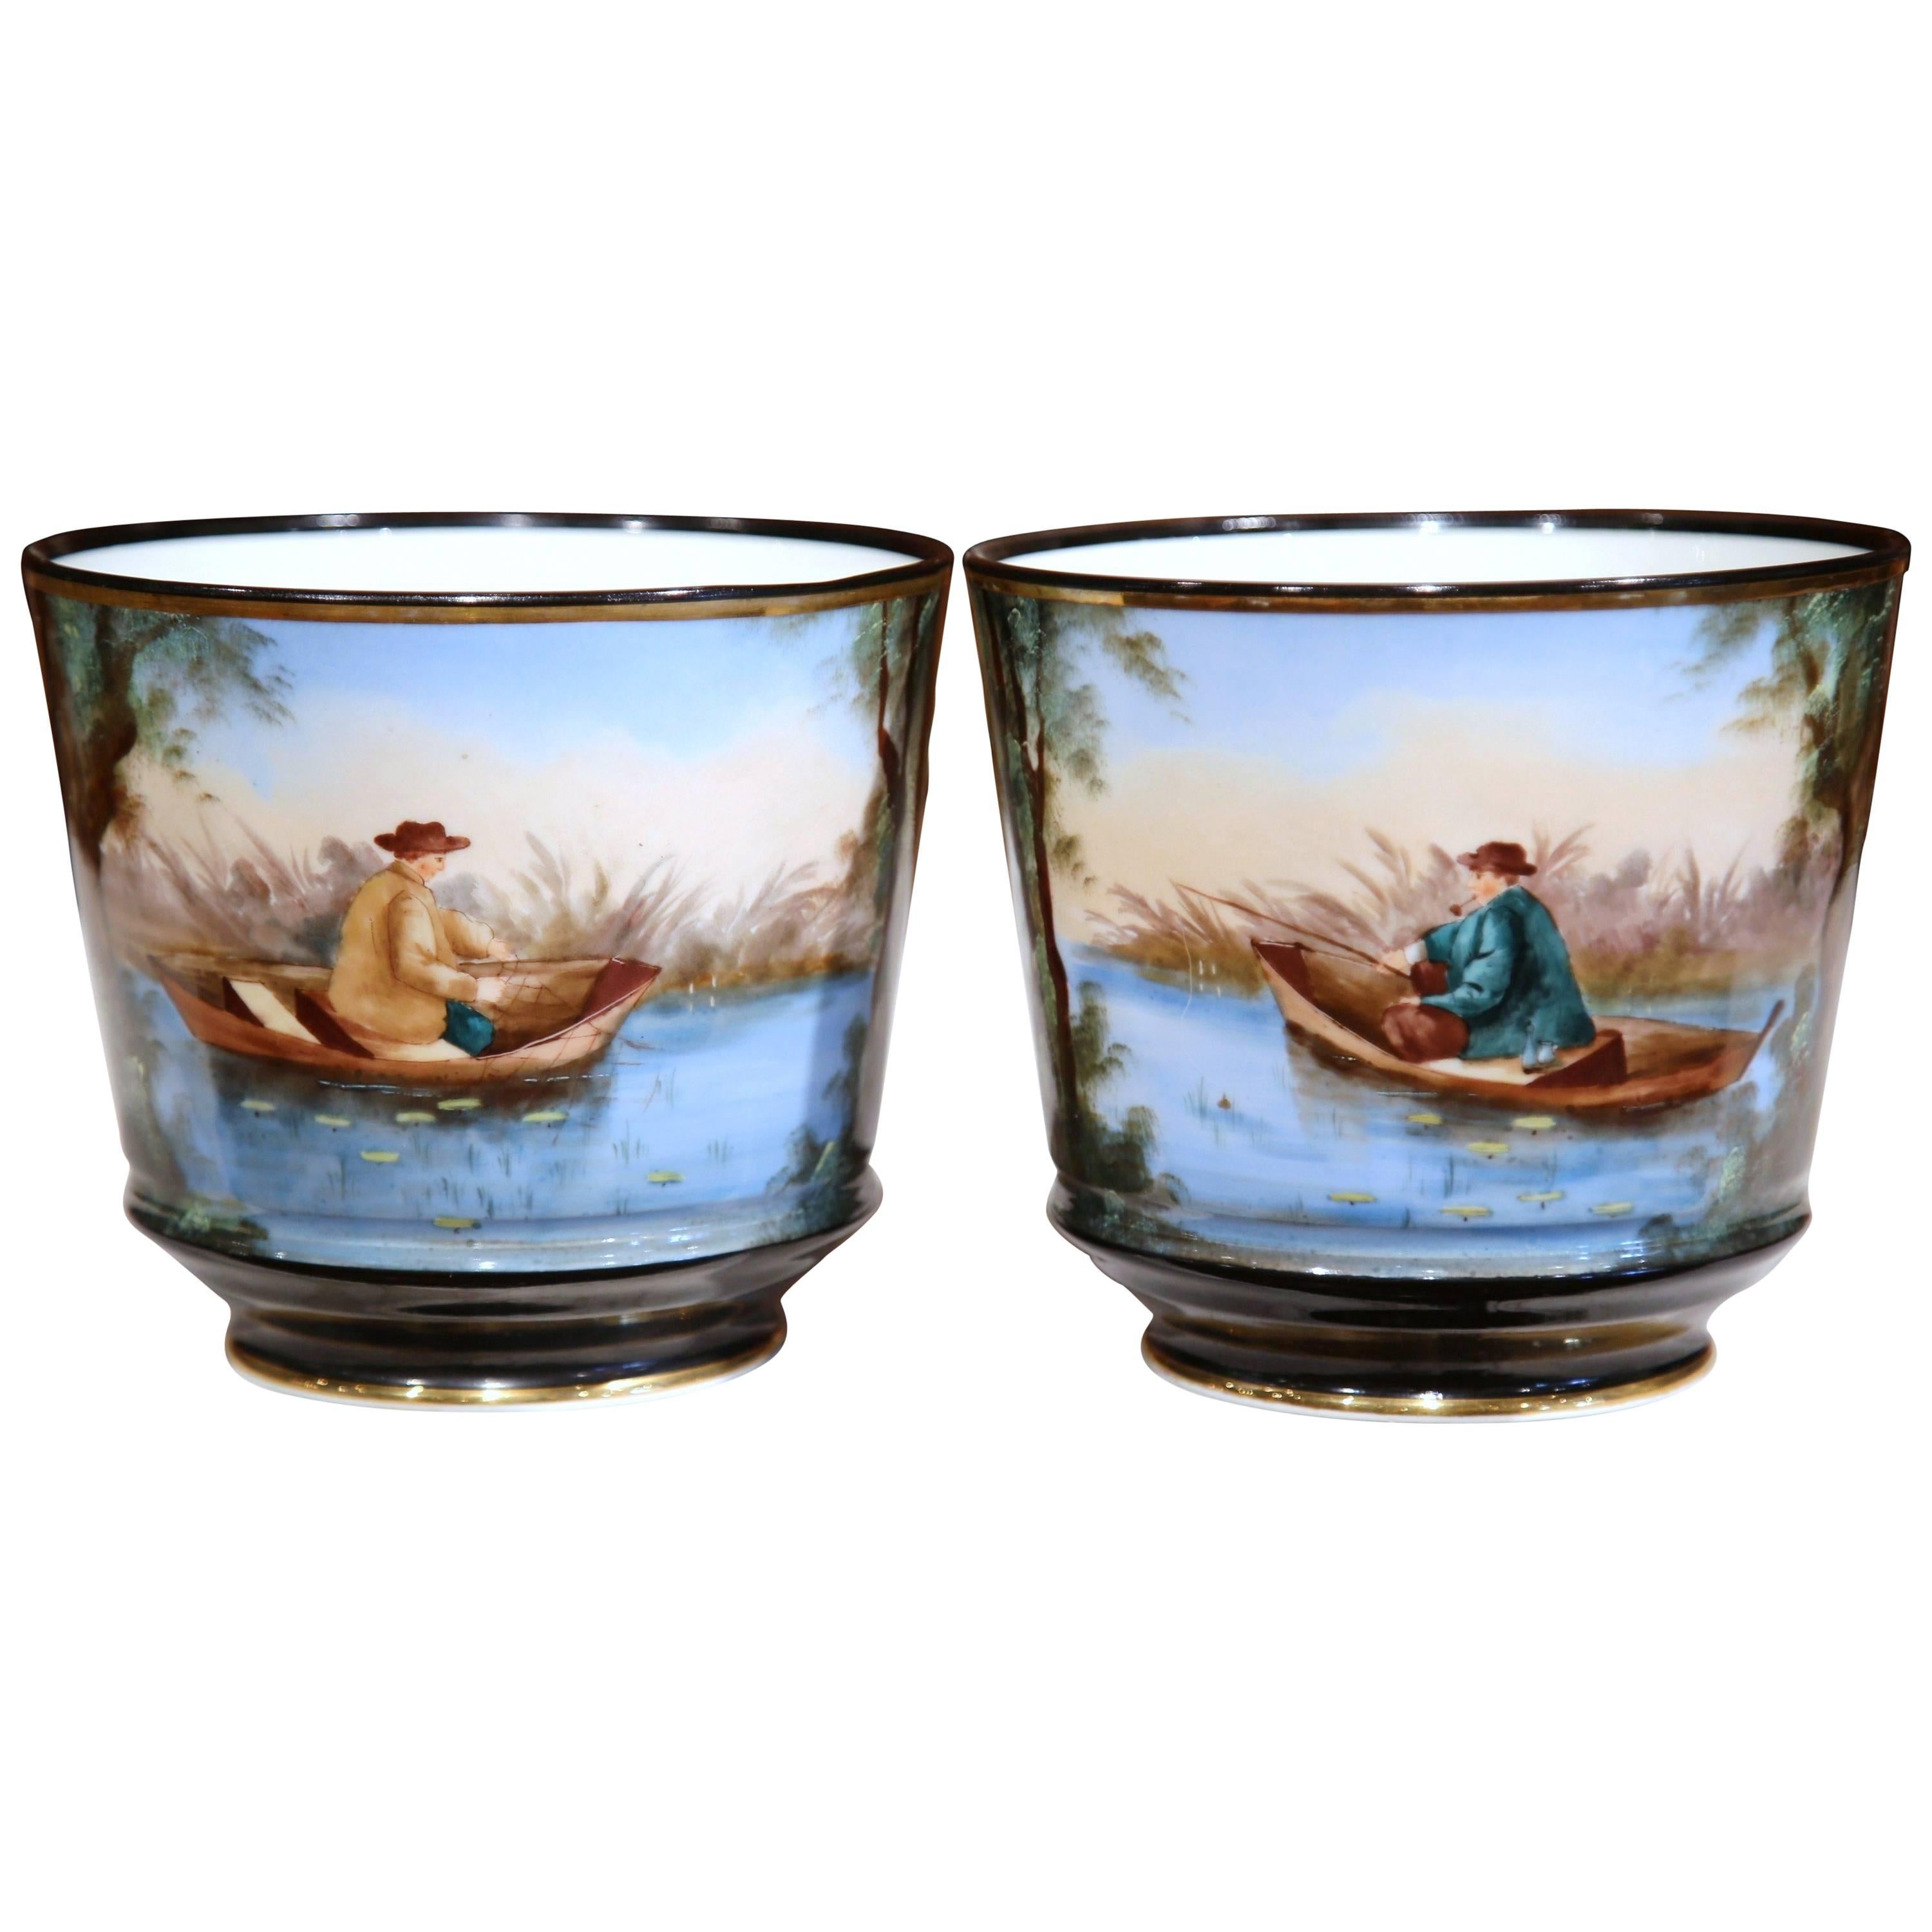 Pair of 19th Century French Hand-Painted Porcelain Cache-Pots with Fishermen